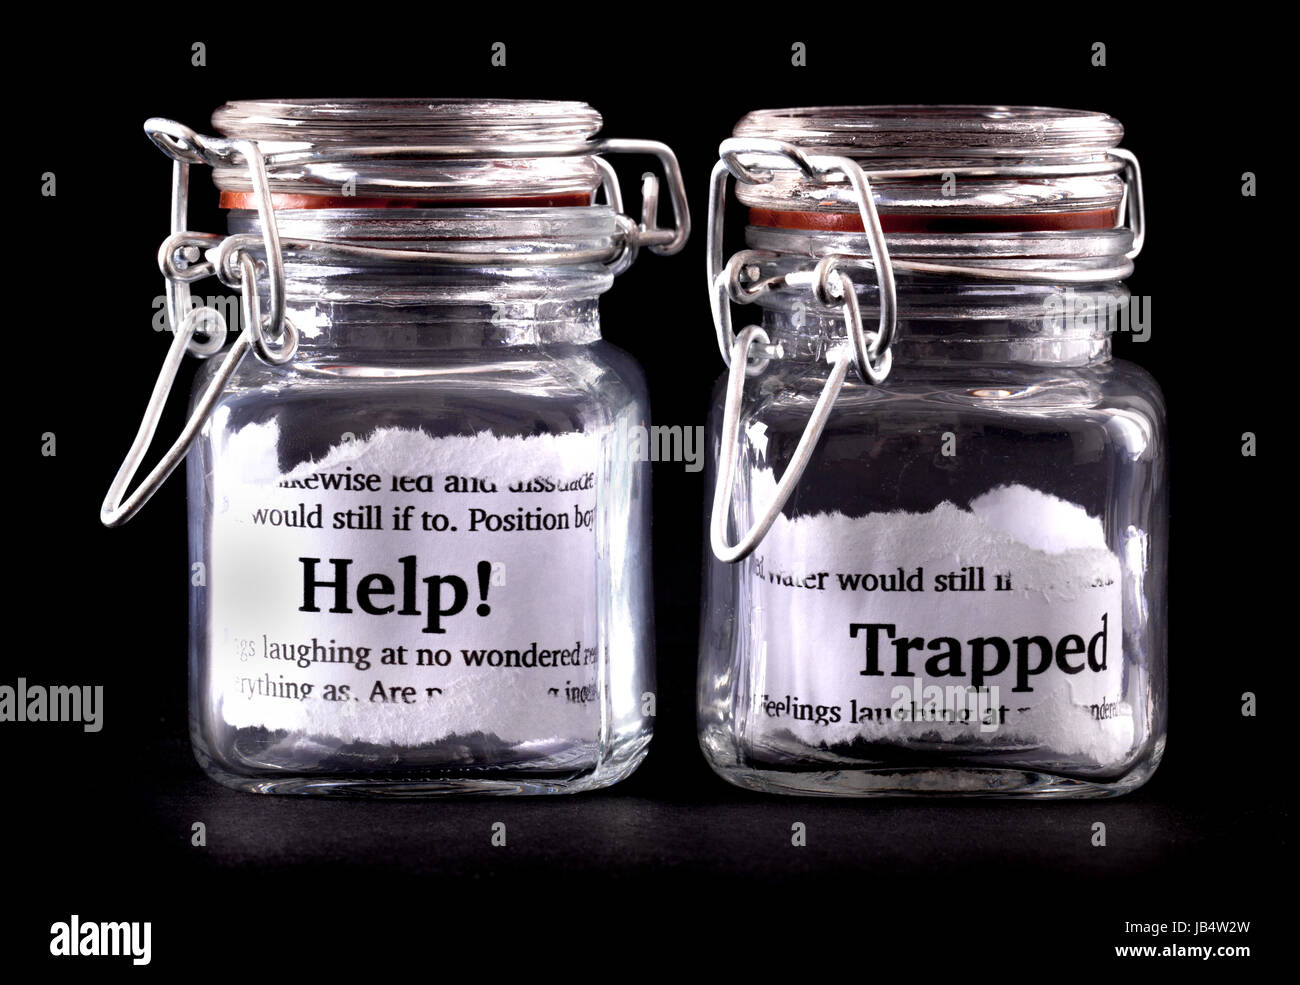 Two closed jars with messages of help and trapped on paper inside Stock Photo